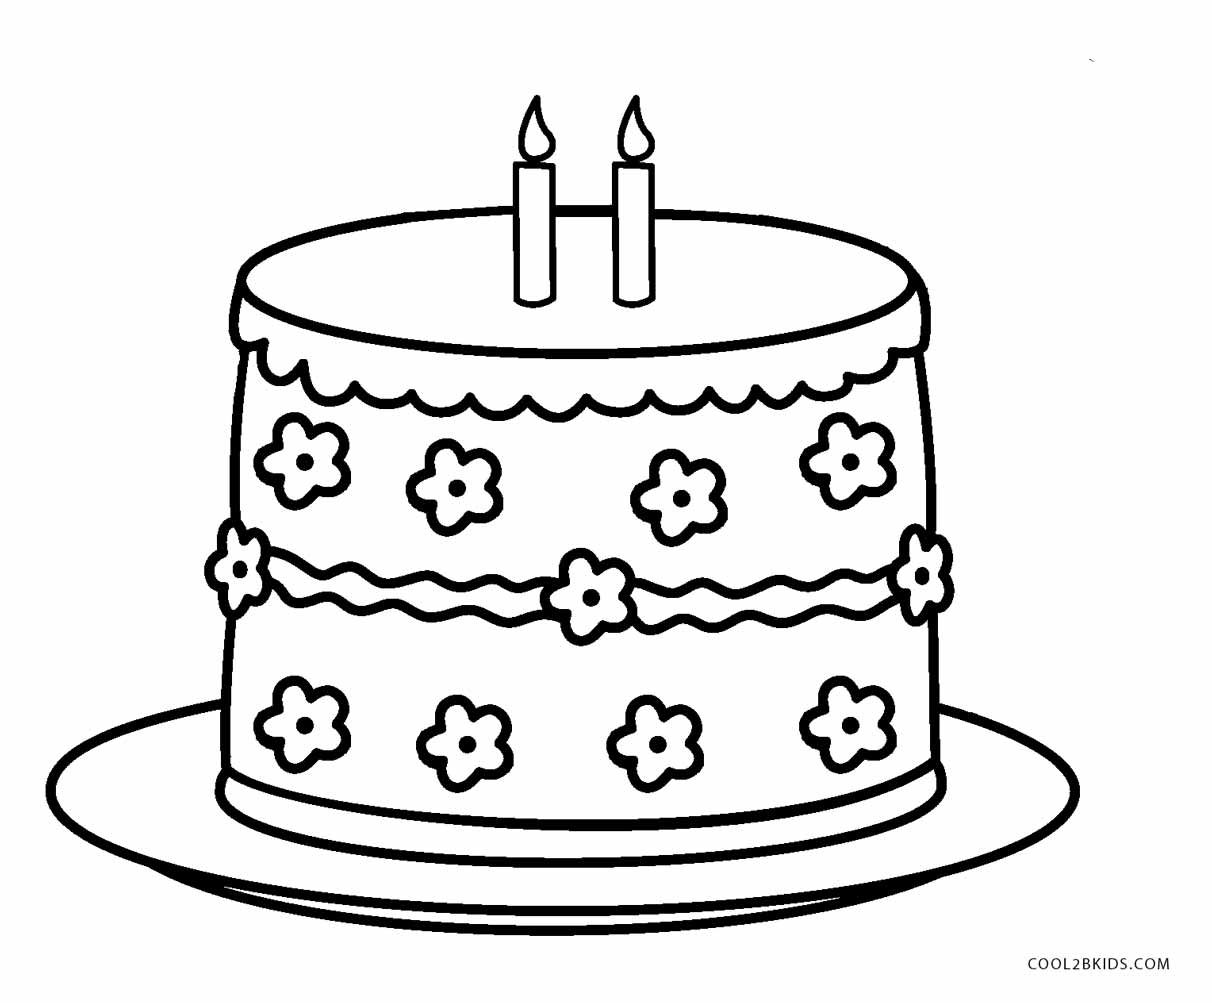 Download Free Printable Birthday Cake Coloring Pages For Kids